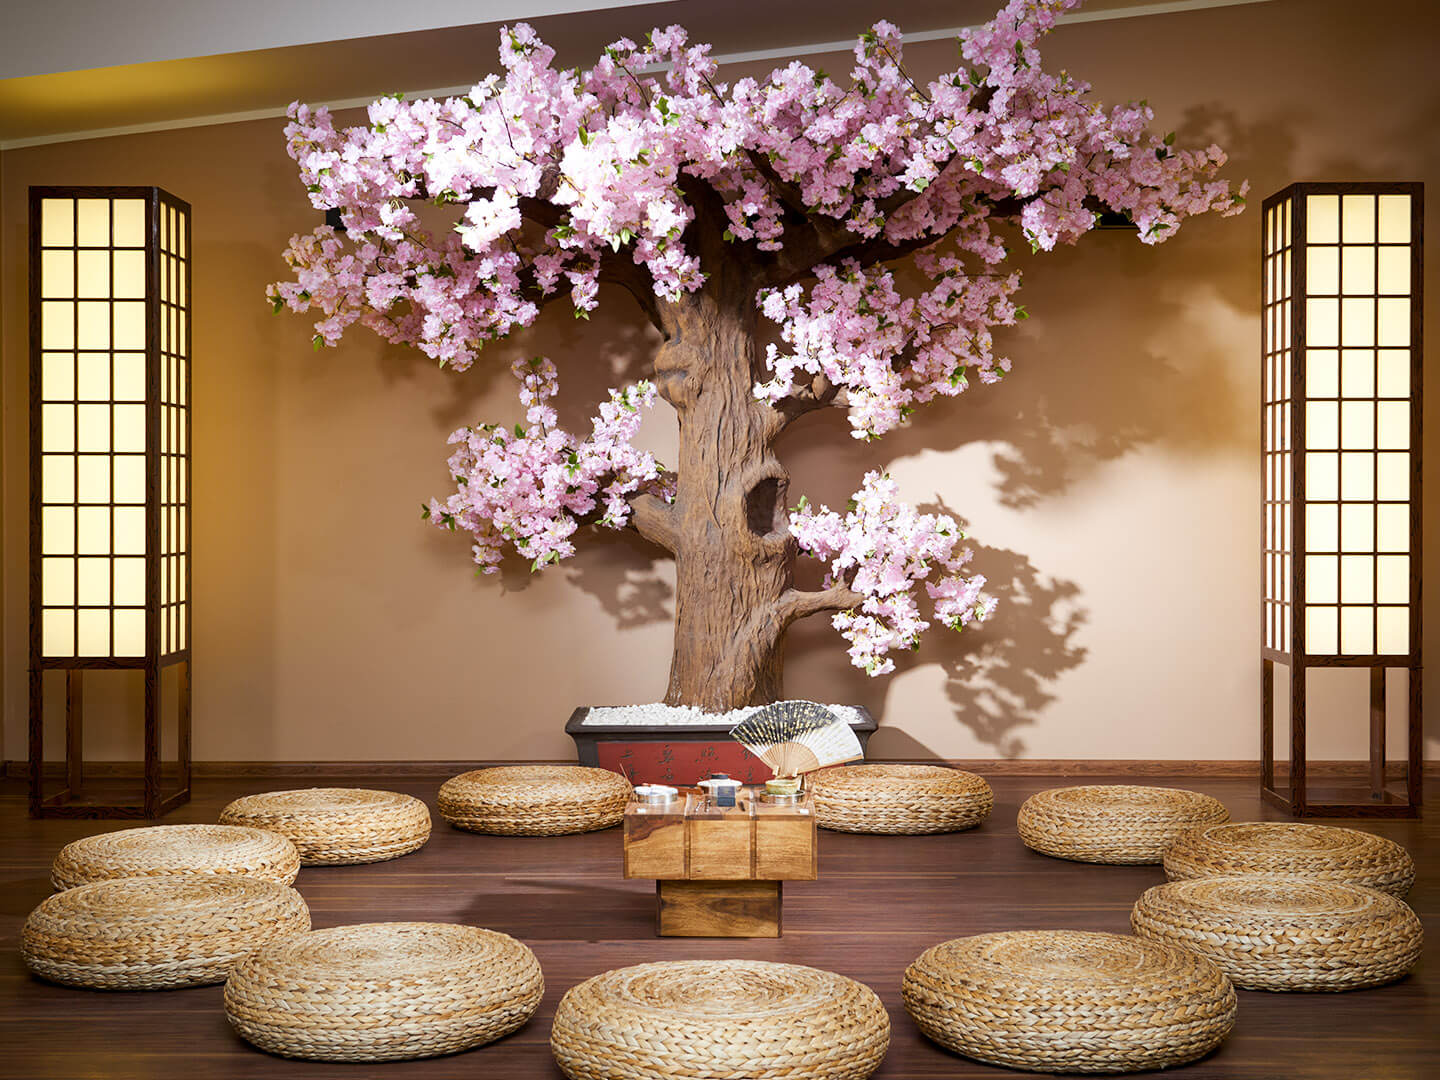 Japanese relaxation room